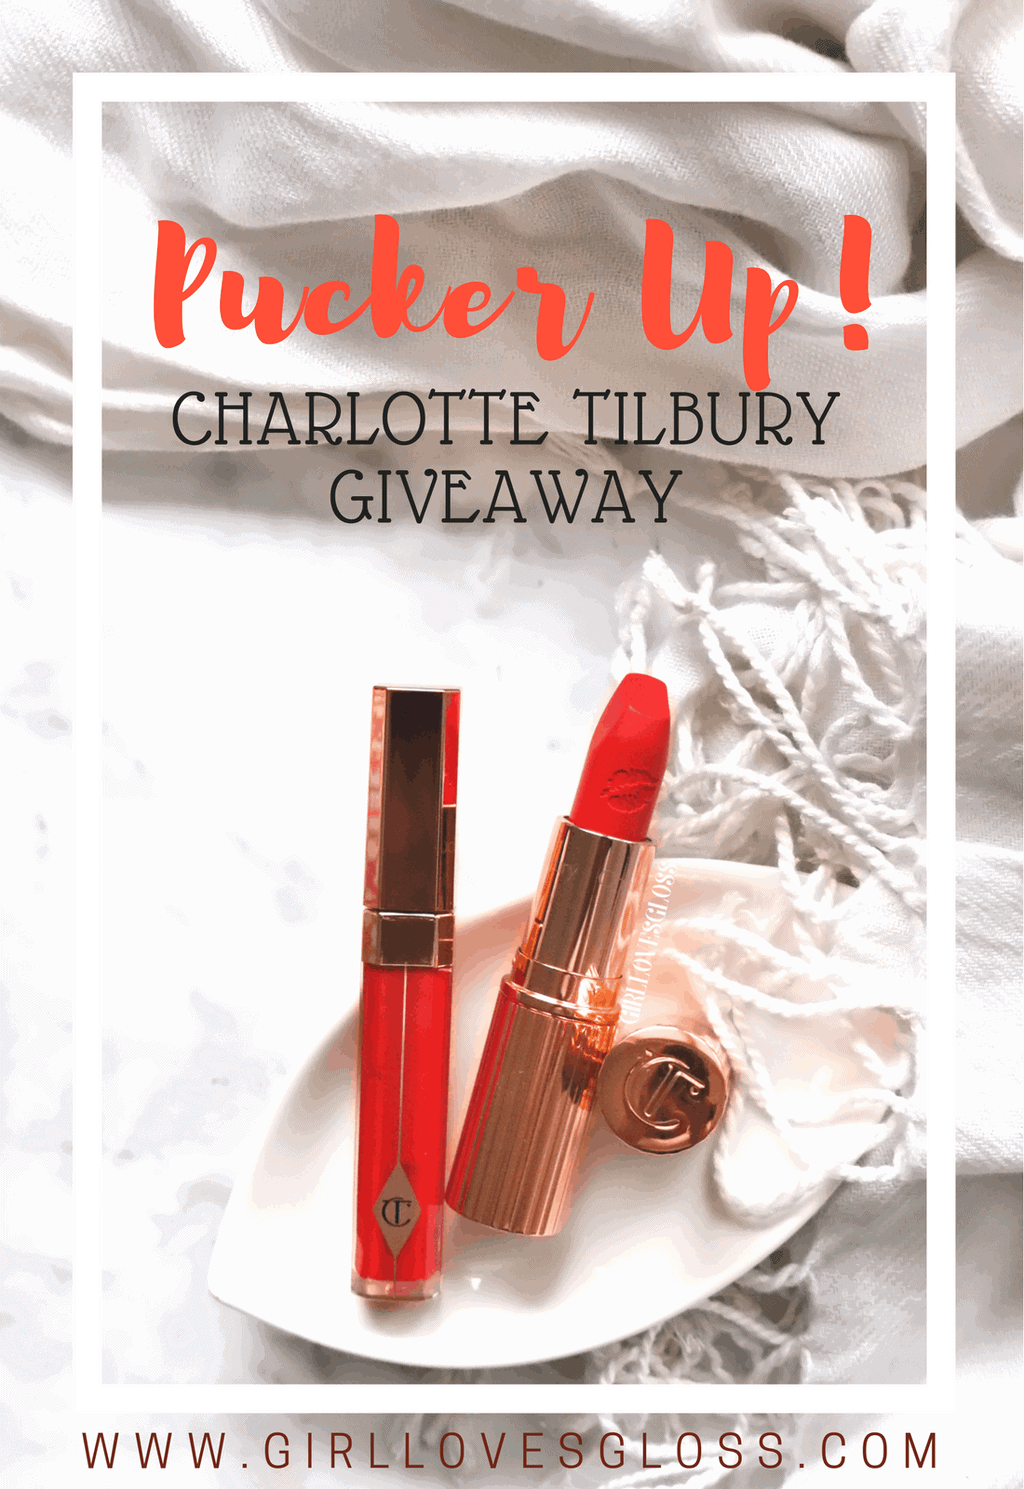 Charlotte Tilbury Instant Look In A Palette Review + Giveaway